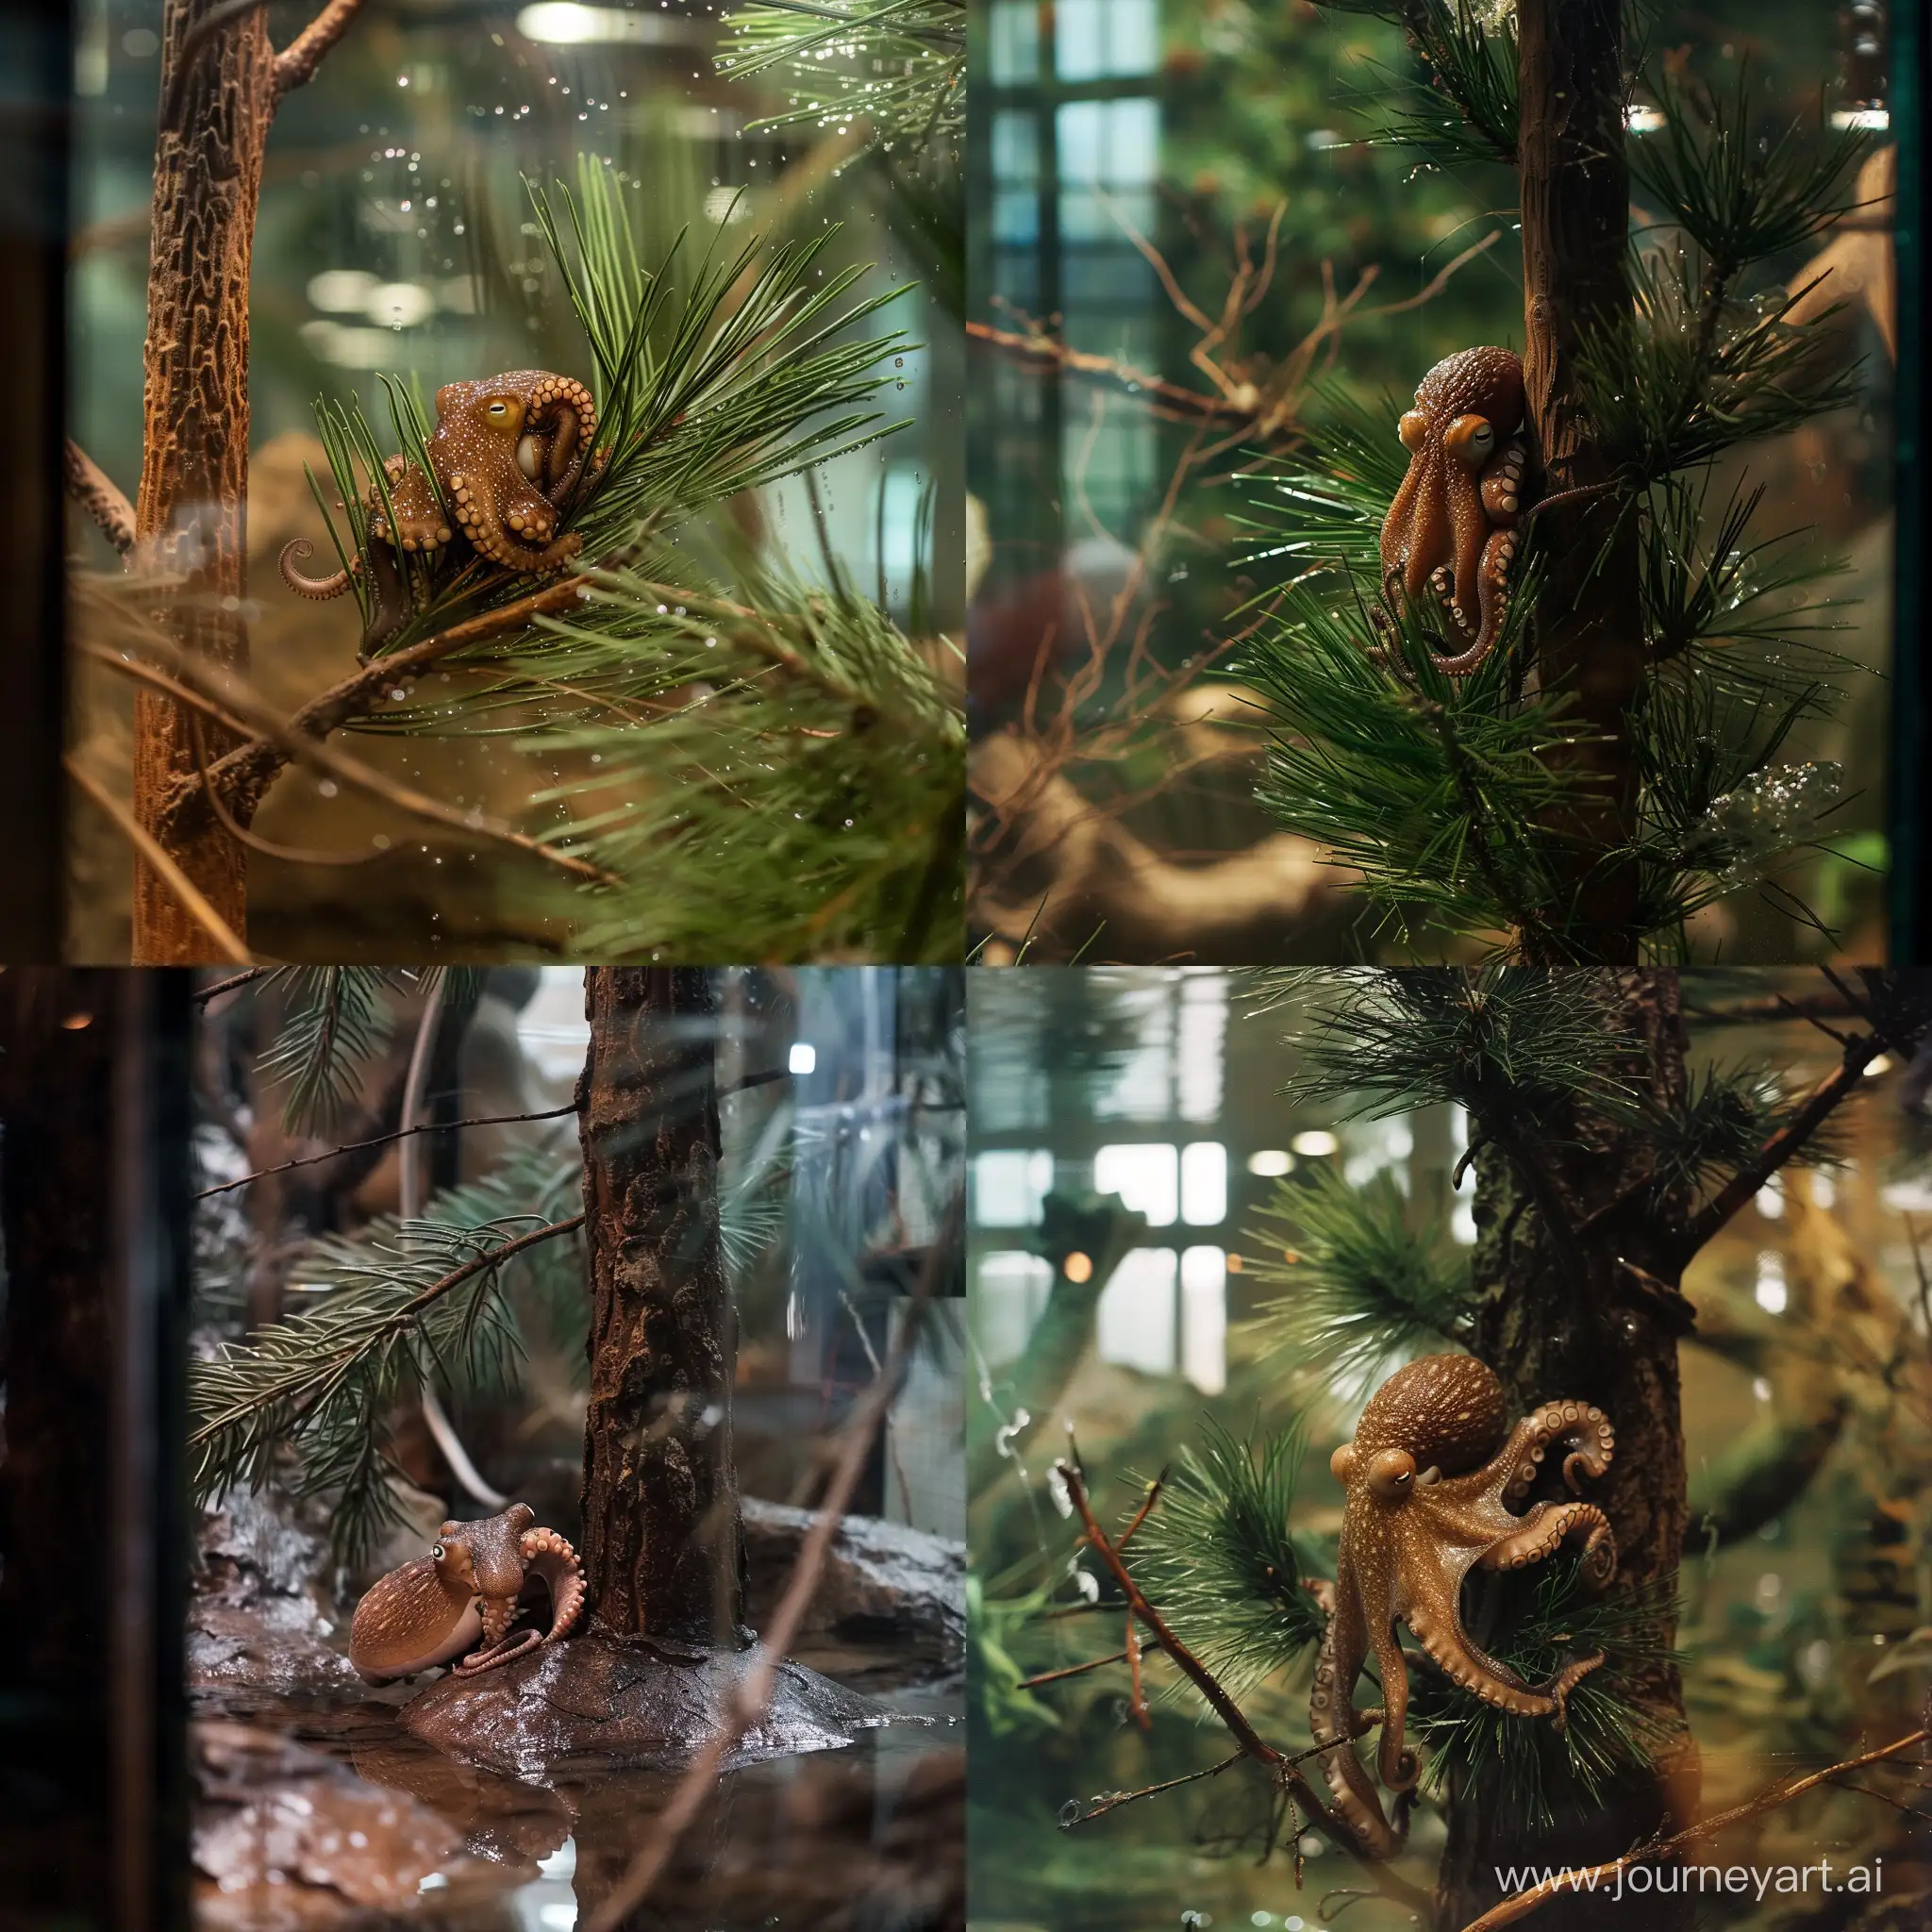 detailed crisp photo of a small wet brown octopus hiding in a pine tree in a zoo terrarium, indoors, professional camera, canon camera, documentary, reflections from glass panel visible, wide shot, dim lighting